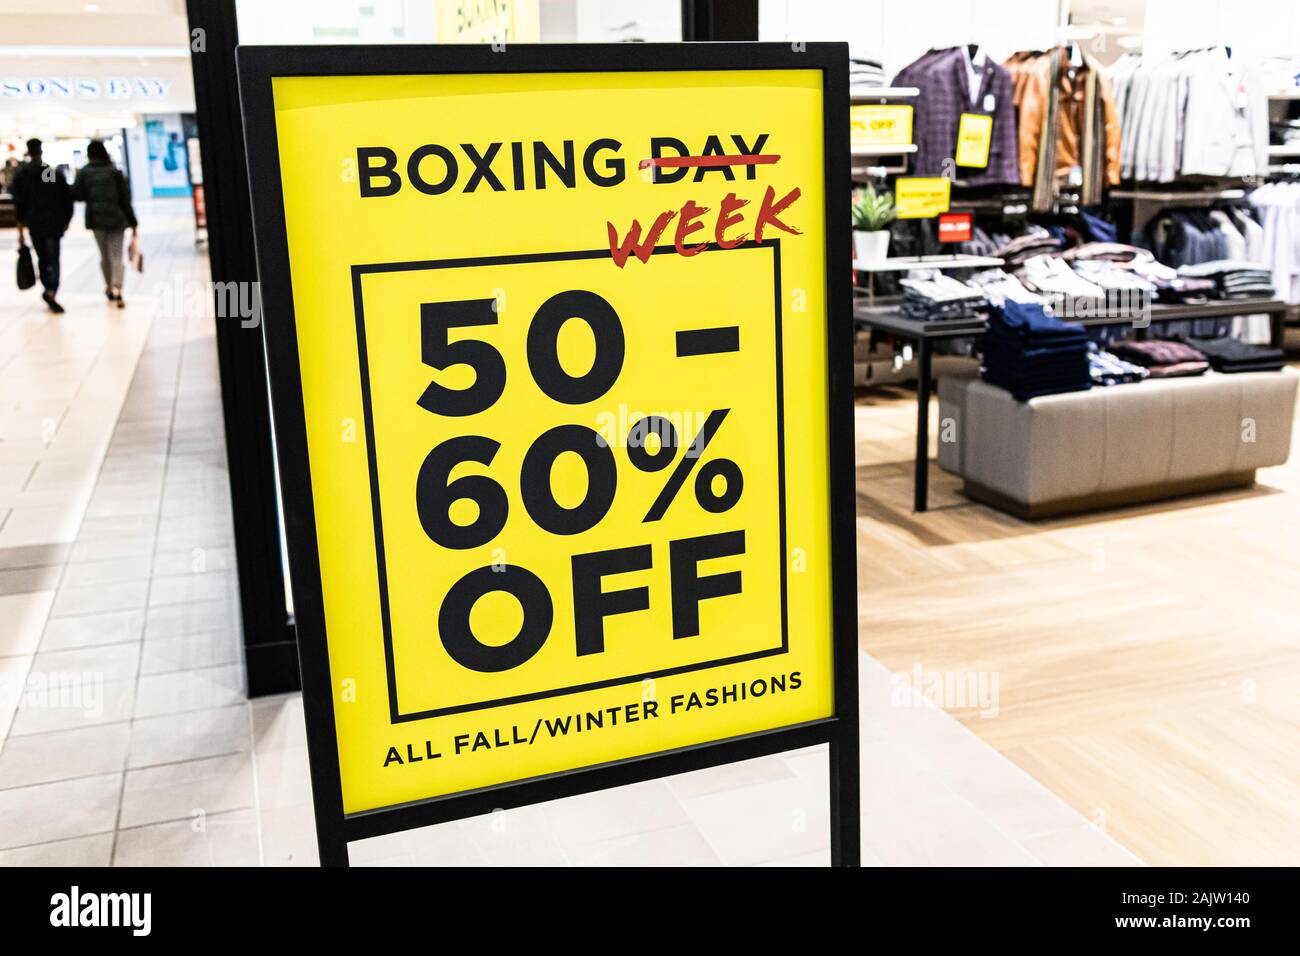 Boxing day sale sign in a mall offering discounts Stock Photo - Alamy